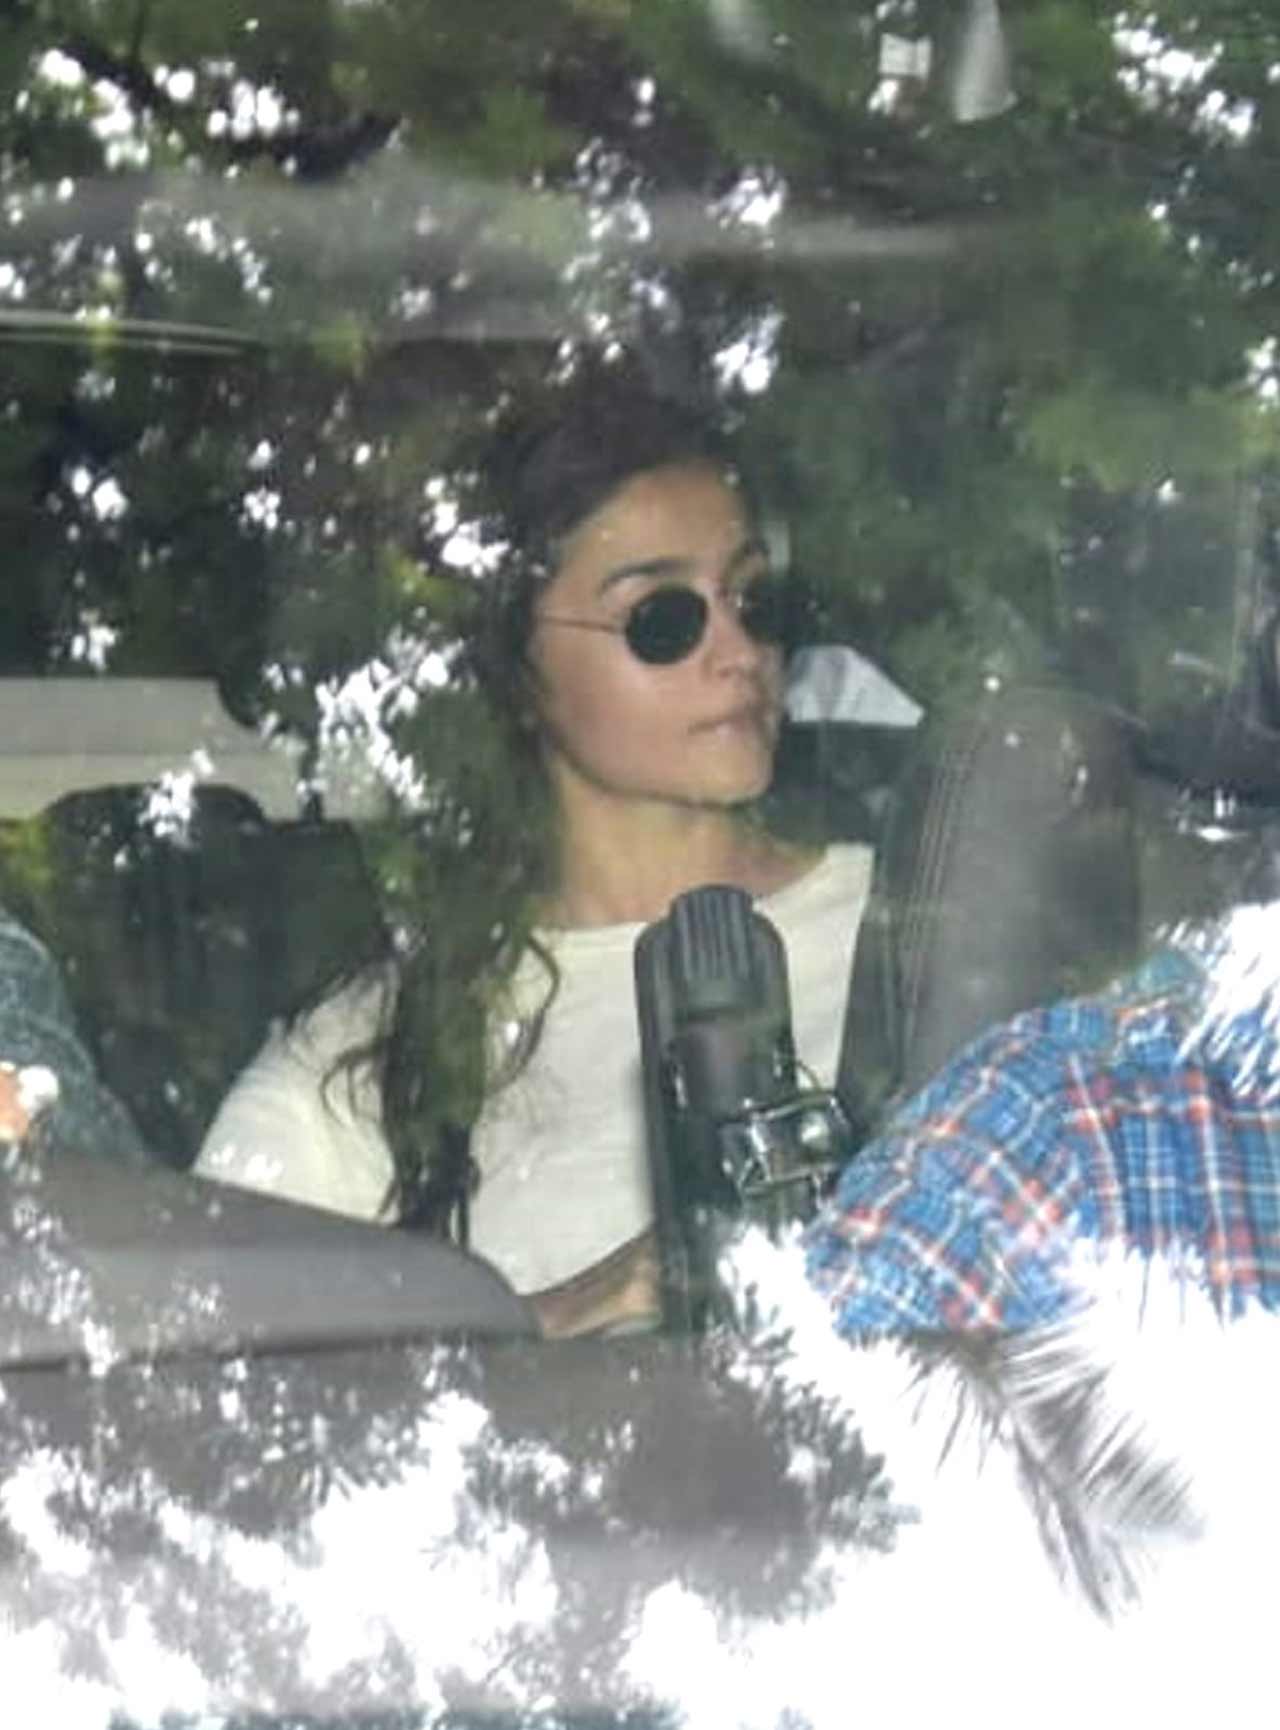 As per reports, Alia Bhatt will be donning a Sabyasachi lehenga for her special day. She will also be reportedly wearing Manish Malhotra outfits for her wedding festivities.